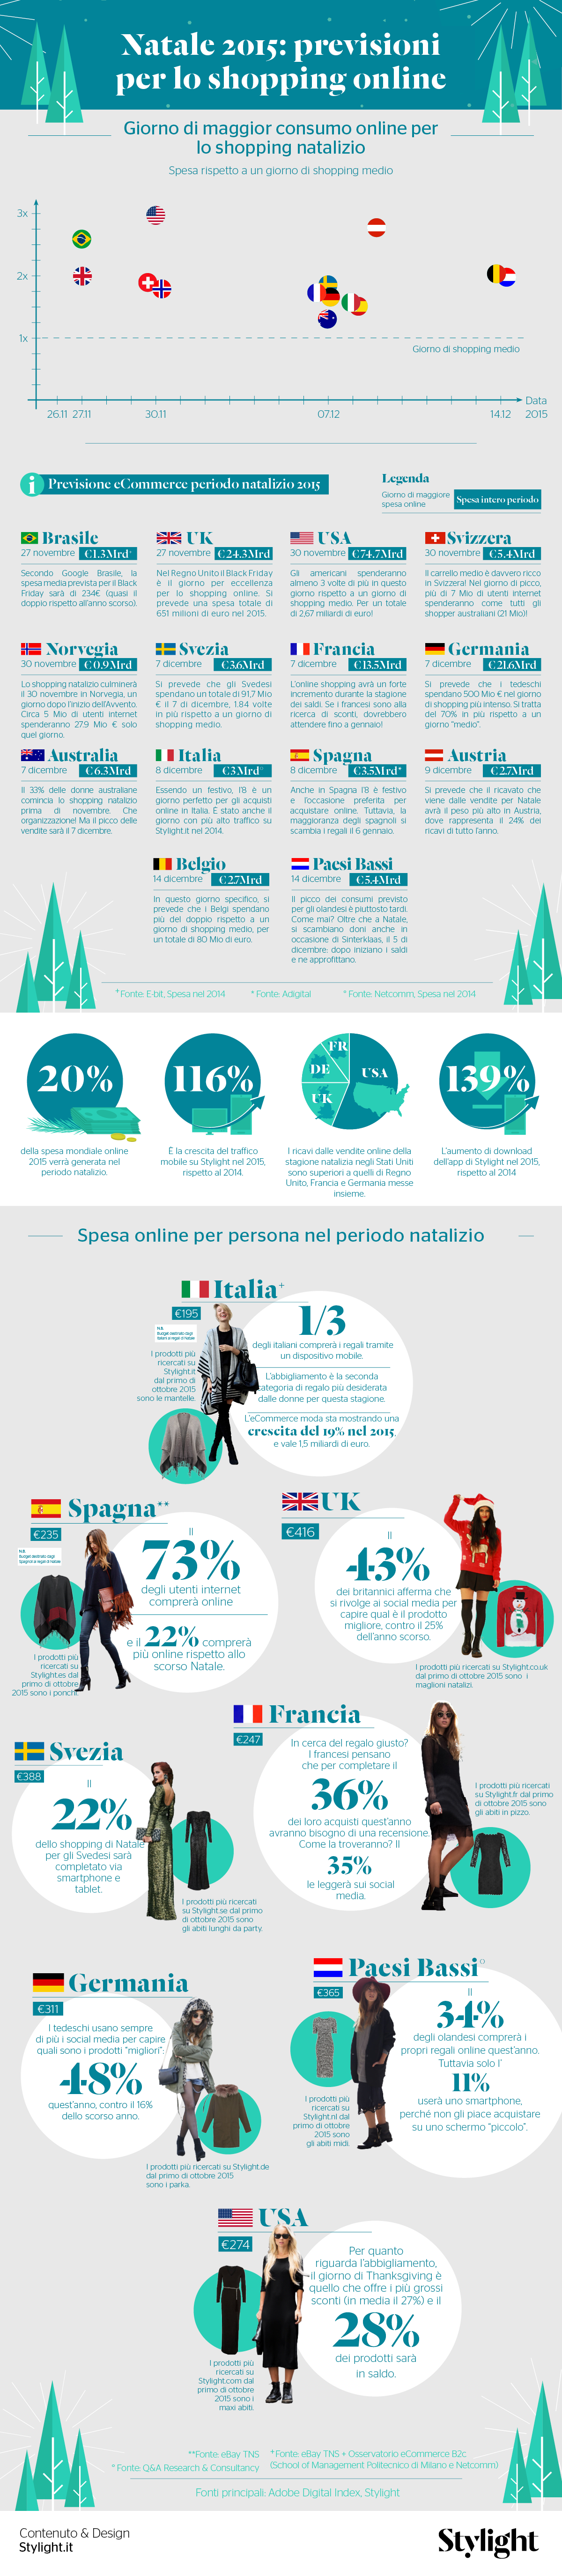 Previsioni shopping online Natale 2015 - Stylight - Infografica